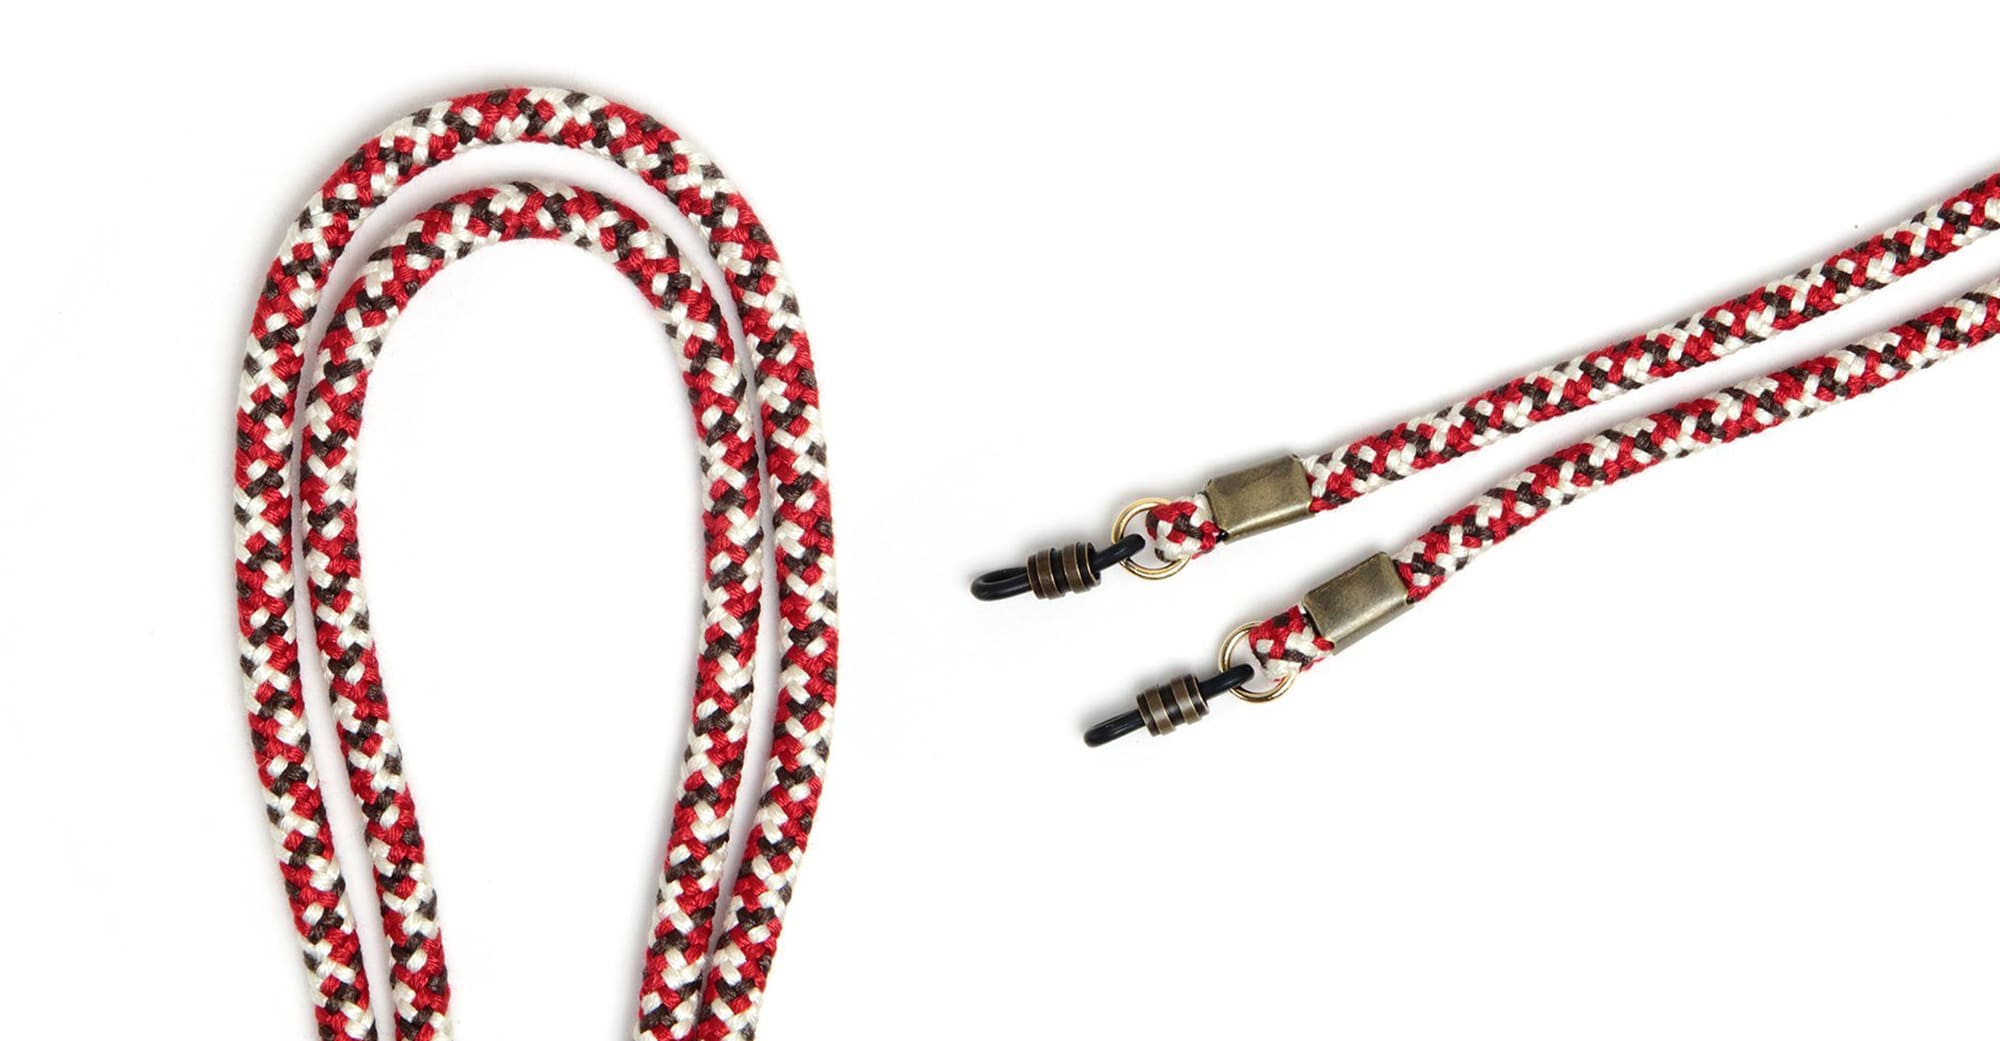 Silk cord - red / brown / white